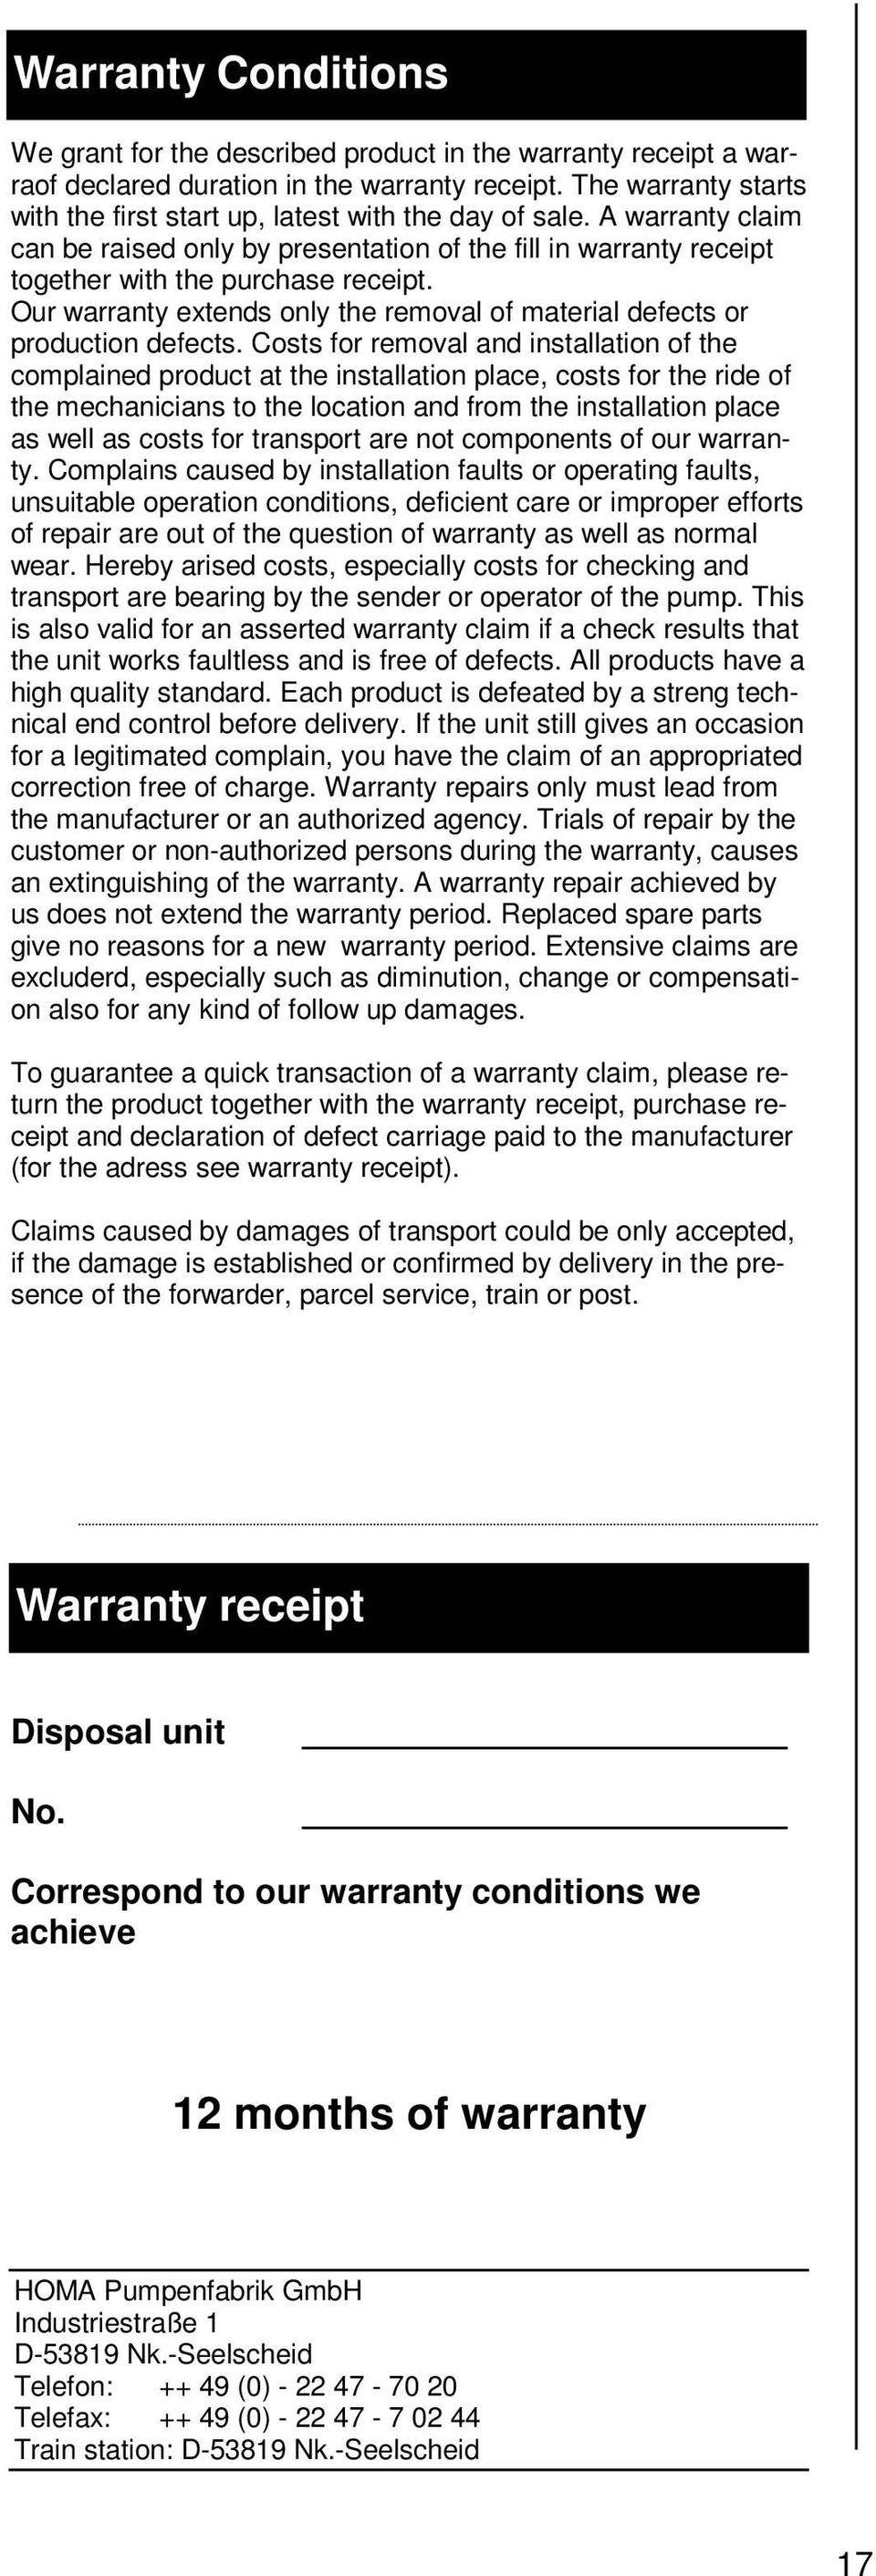 Our warranty extends only the removal of material defects or production defects.